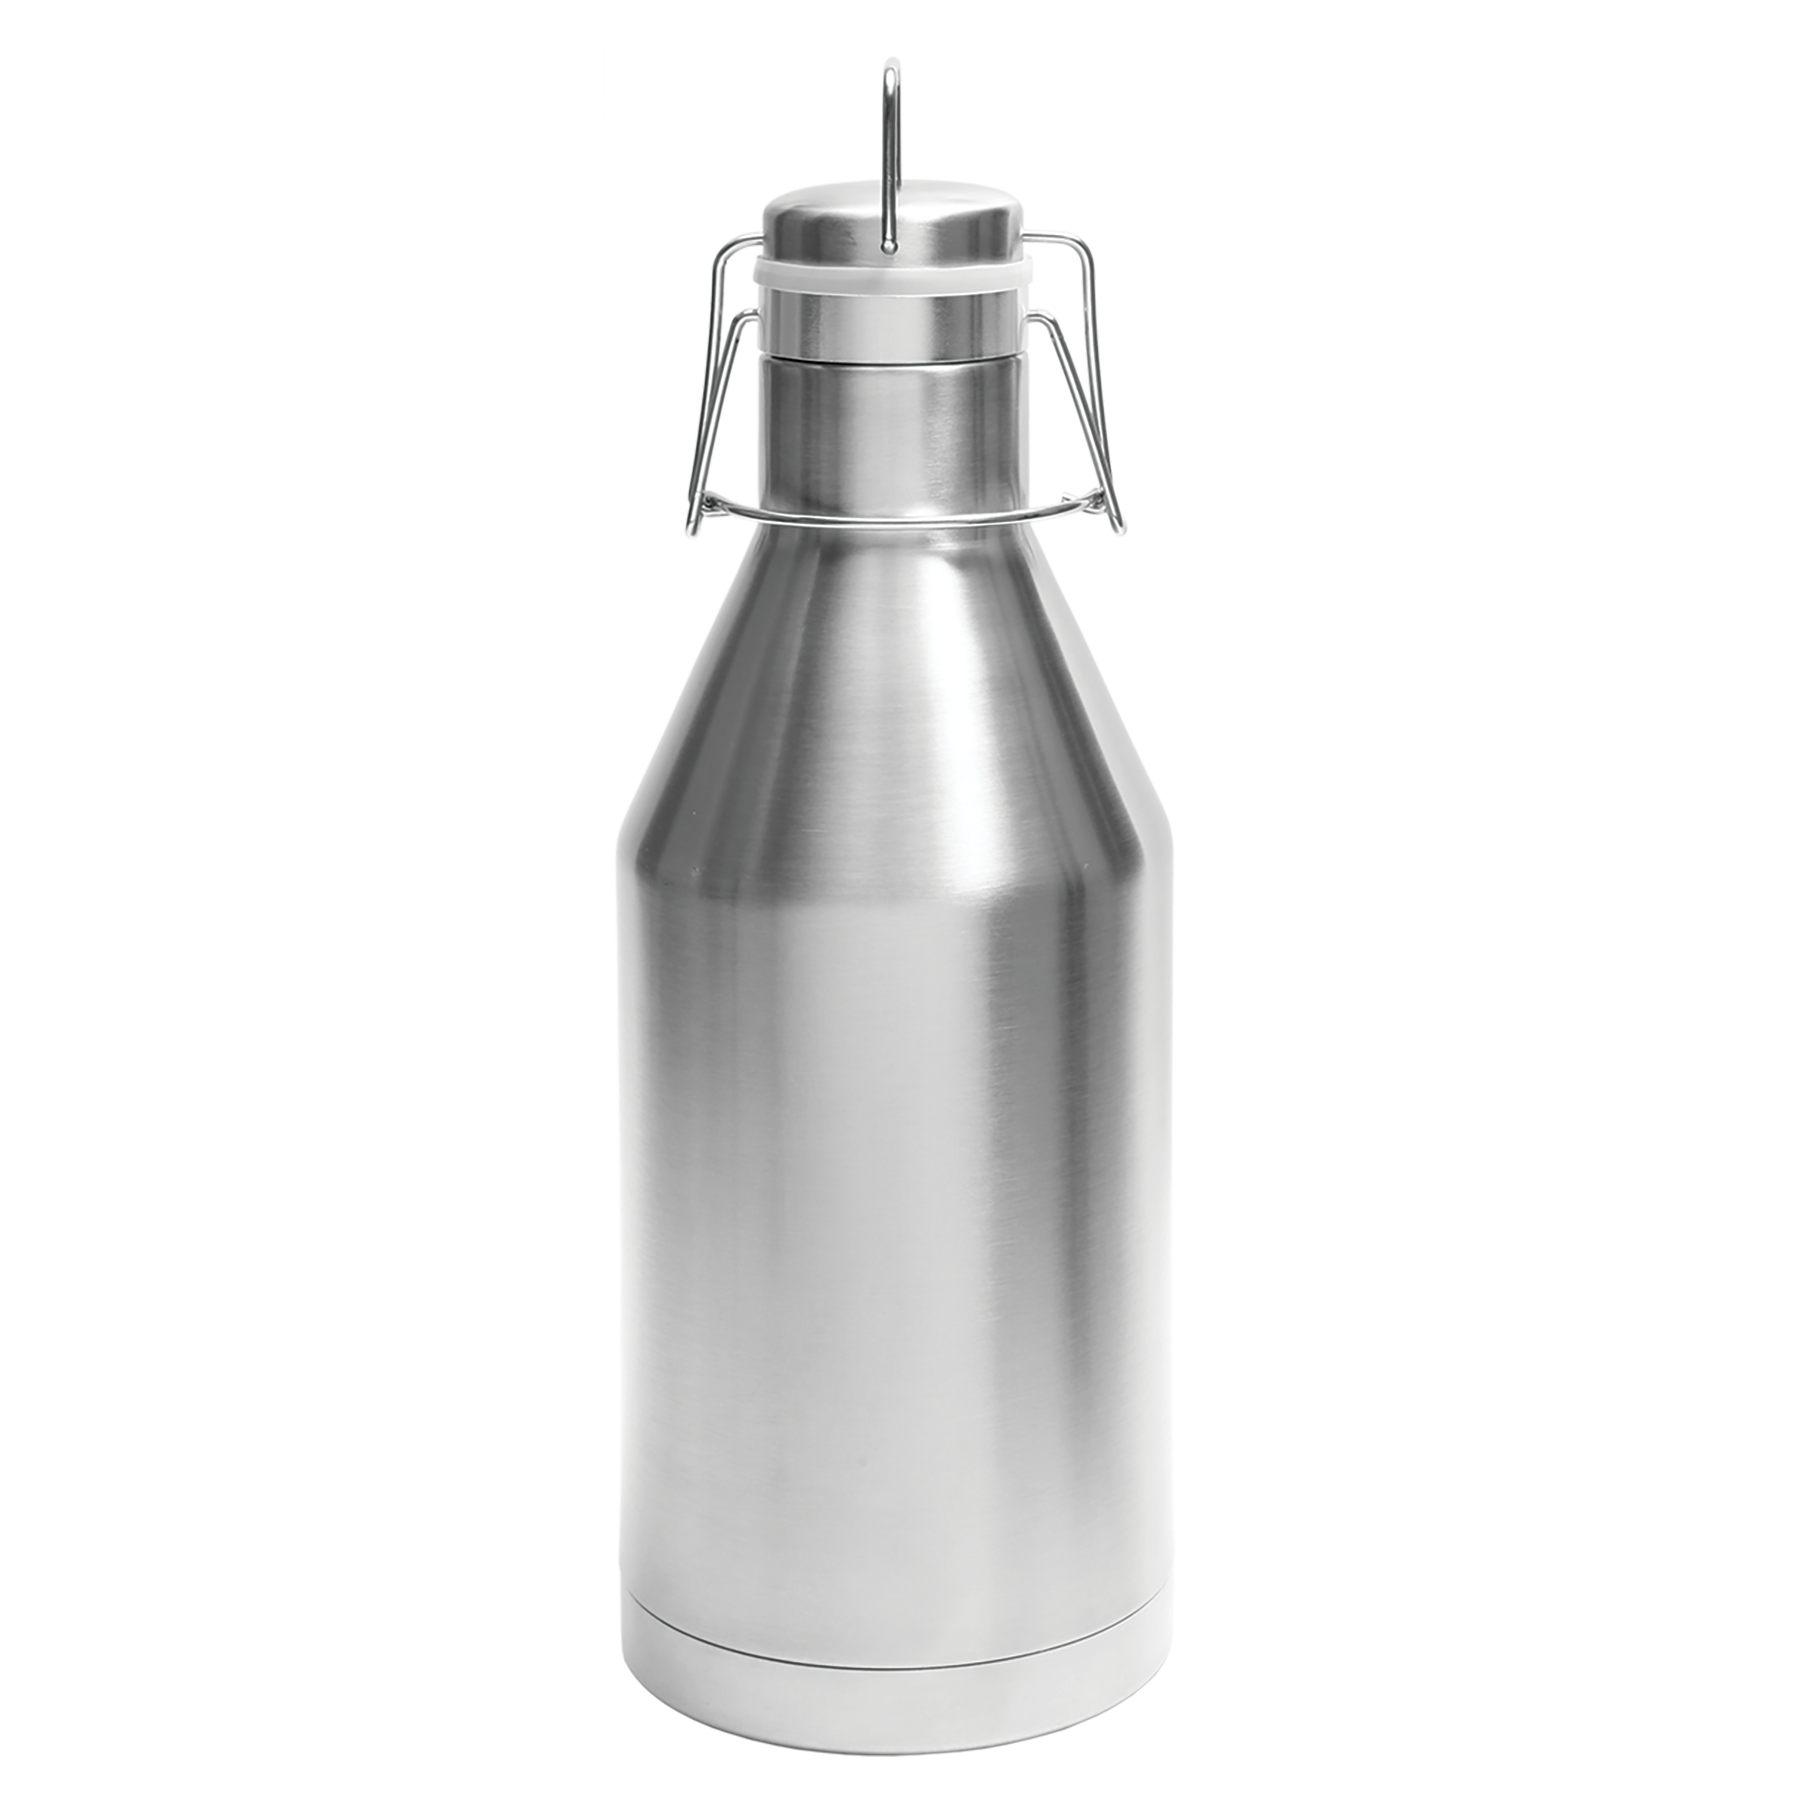 Stainless Steel 64oz Growler -One Free Engraving -Double-wall Vacuum Insulated -Made from 18/8 Gauge Stainless Steel (Type 304 Food Grade) -Swing Top Lid (Hand Wash Only) -Not recommended for Dishwasher -Works with Cold and Hot Drinks -2 Color Options -Perfect for Personalized Gifts, Awards, Incentives, Brewery, Swag & Fundraisers